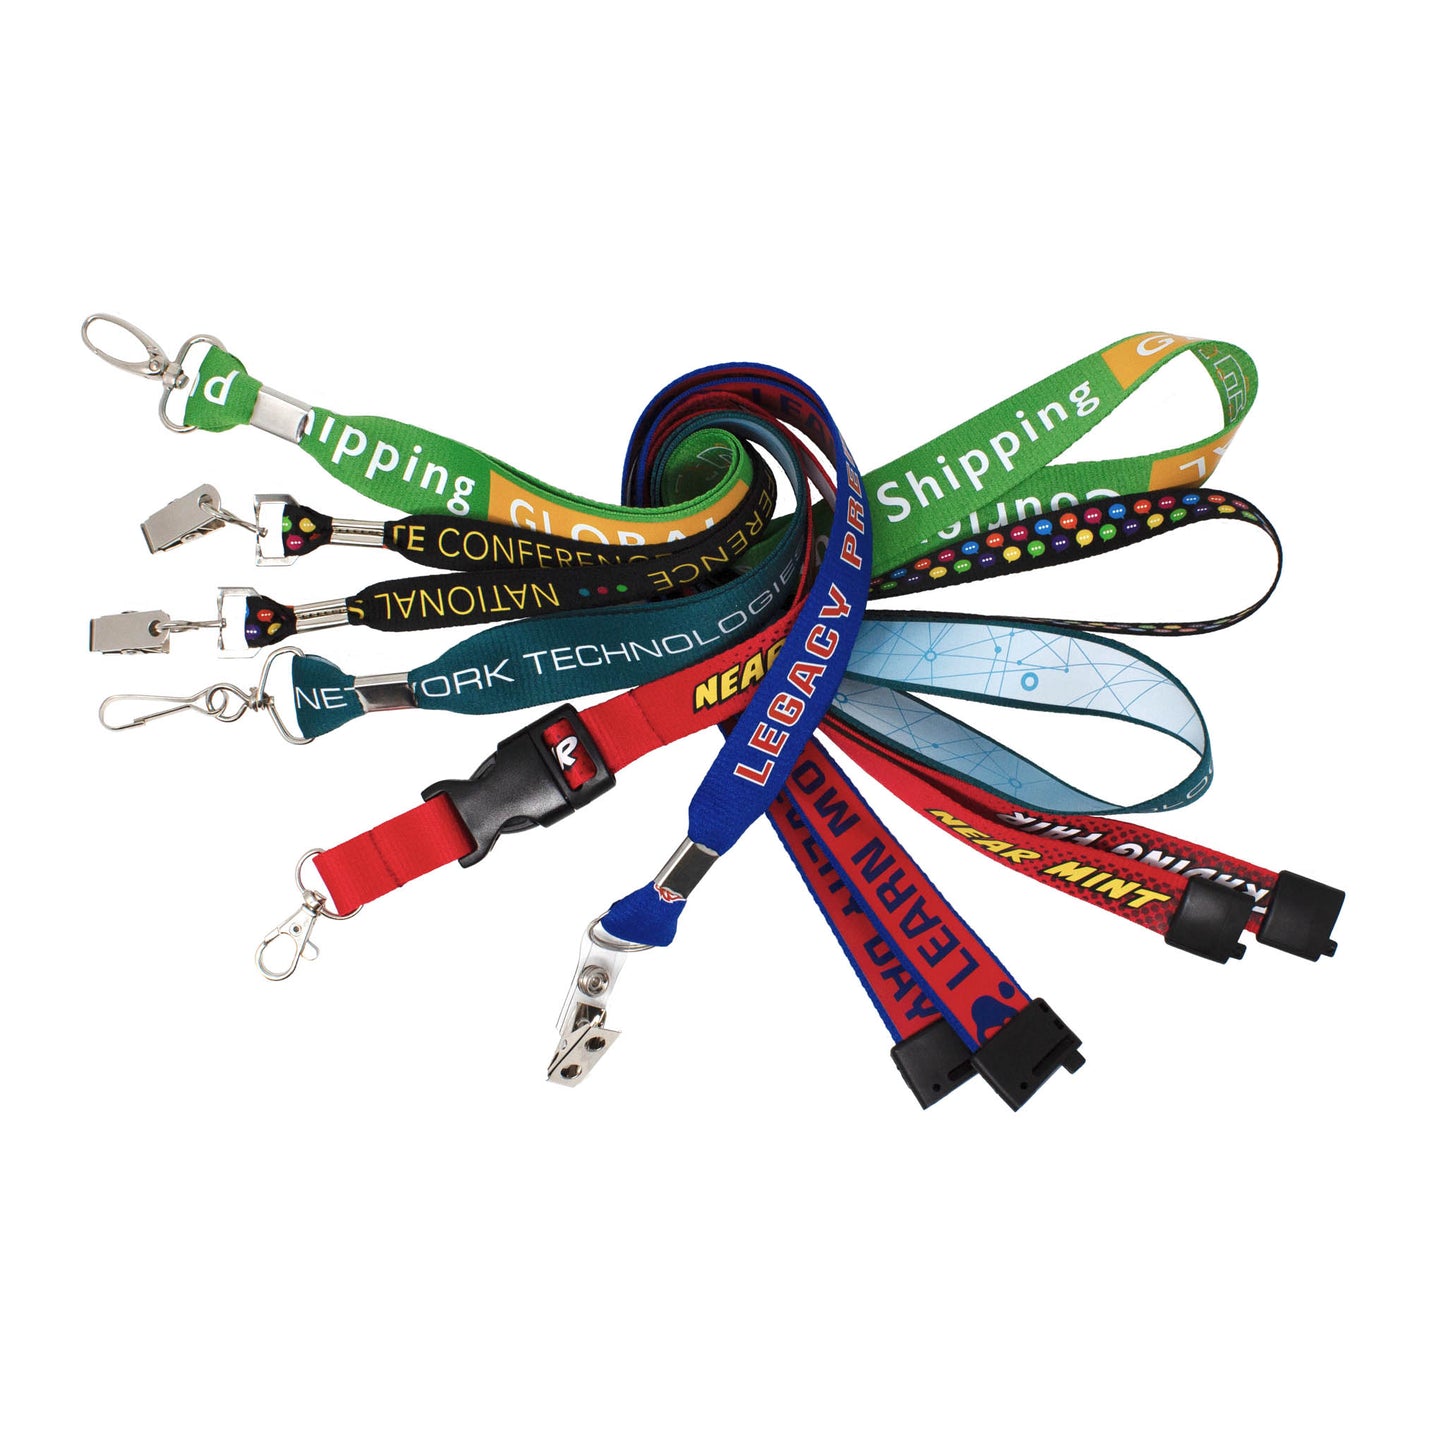 A variety of colorful Custom Printed Lanyards Online Designer - Personalized Lanyards for Company, Conference, and VIP Events with different designs and attachments, featuring expert lanyard printing, are laid out against a white background.